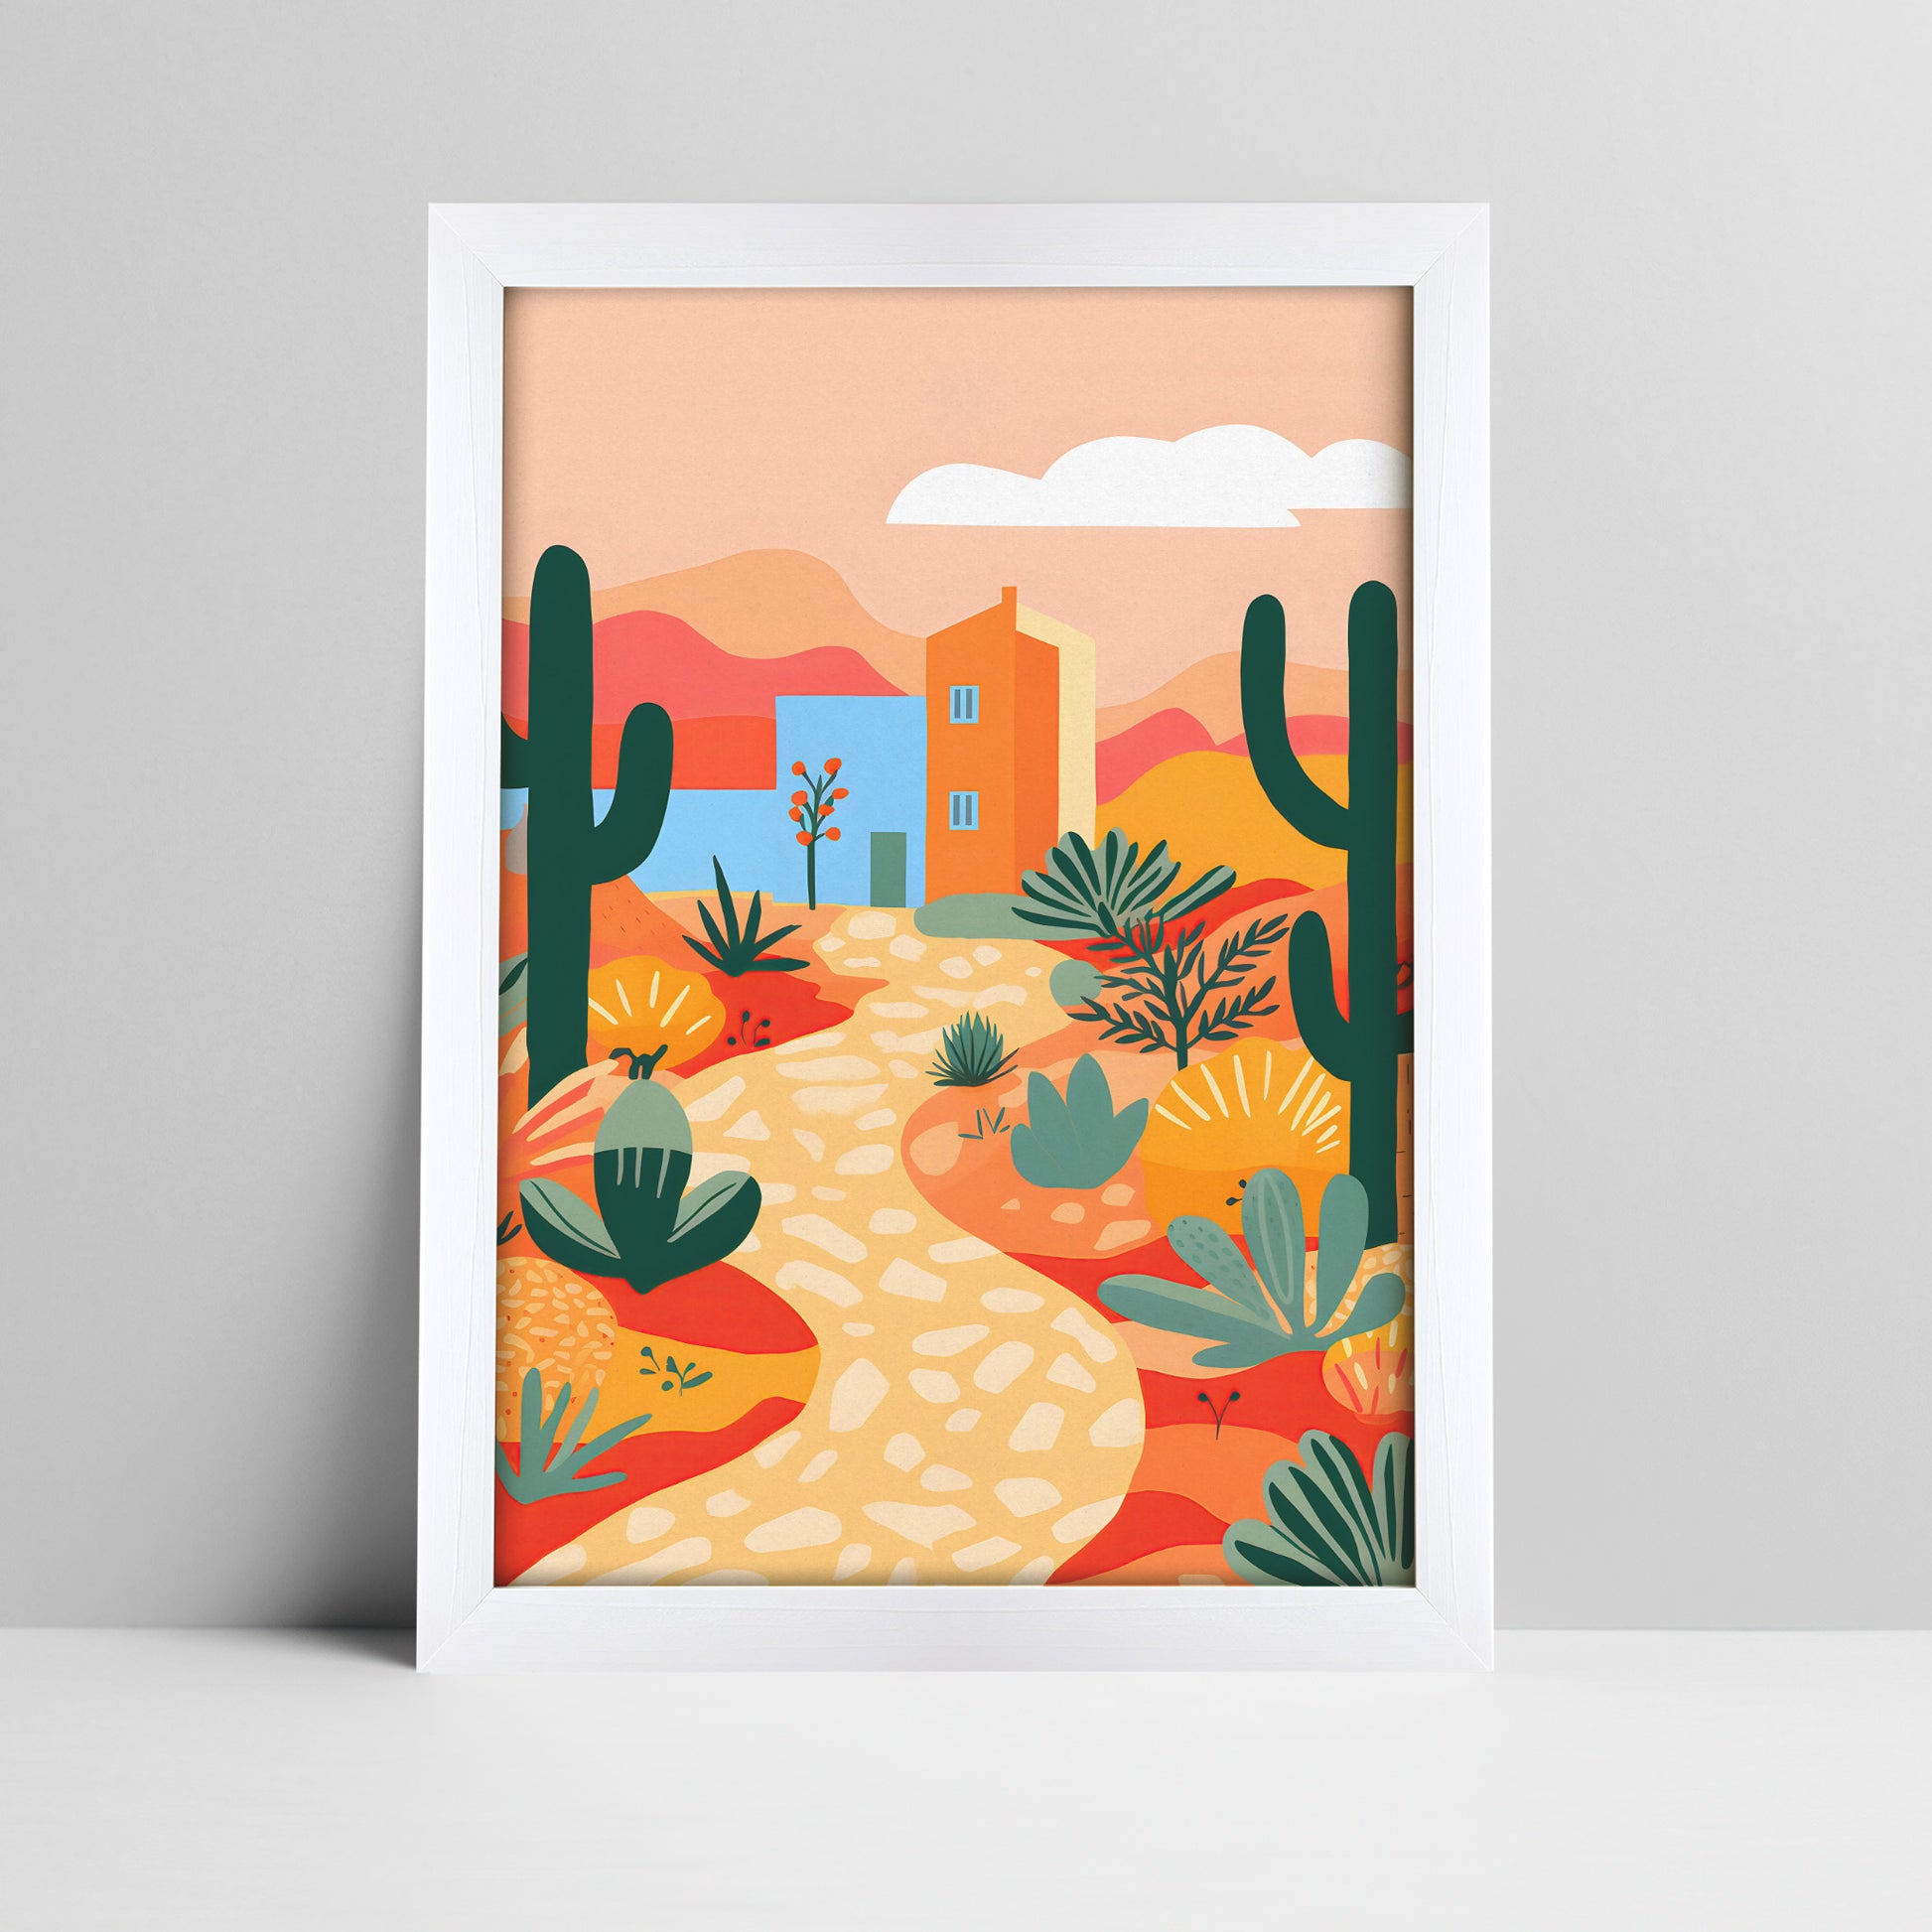 Art print of desert landscape illustration with cacti and house in a bold white frame